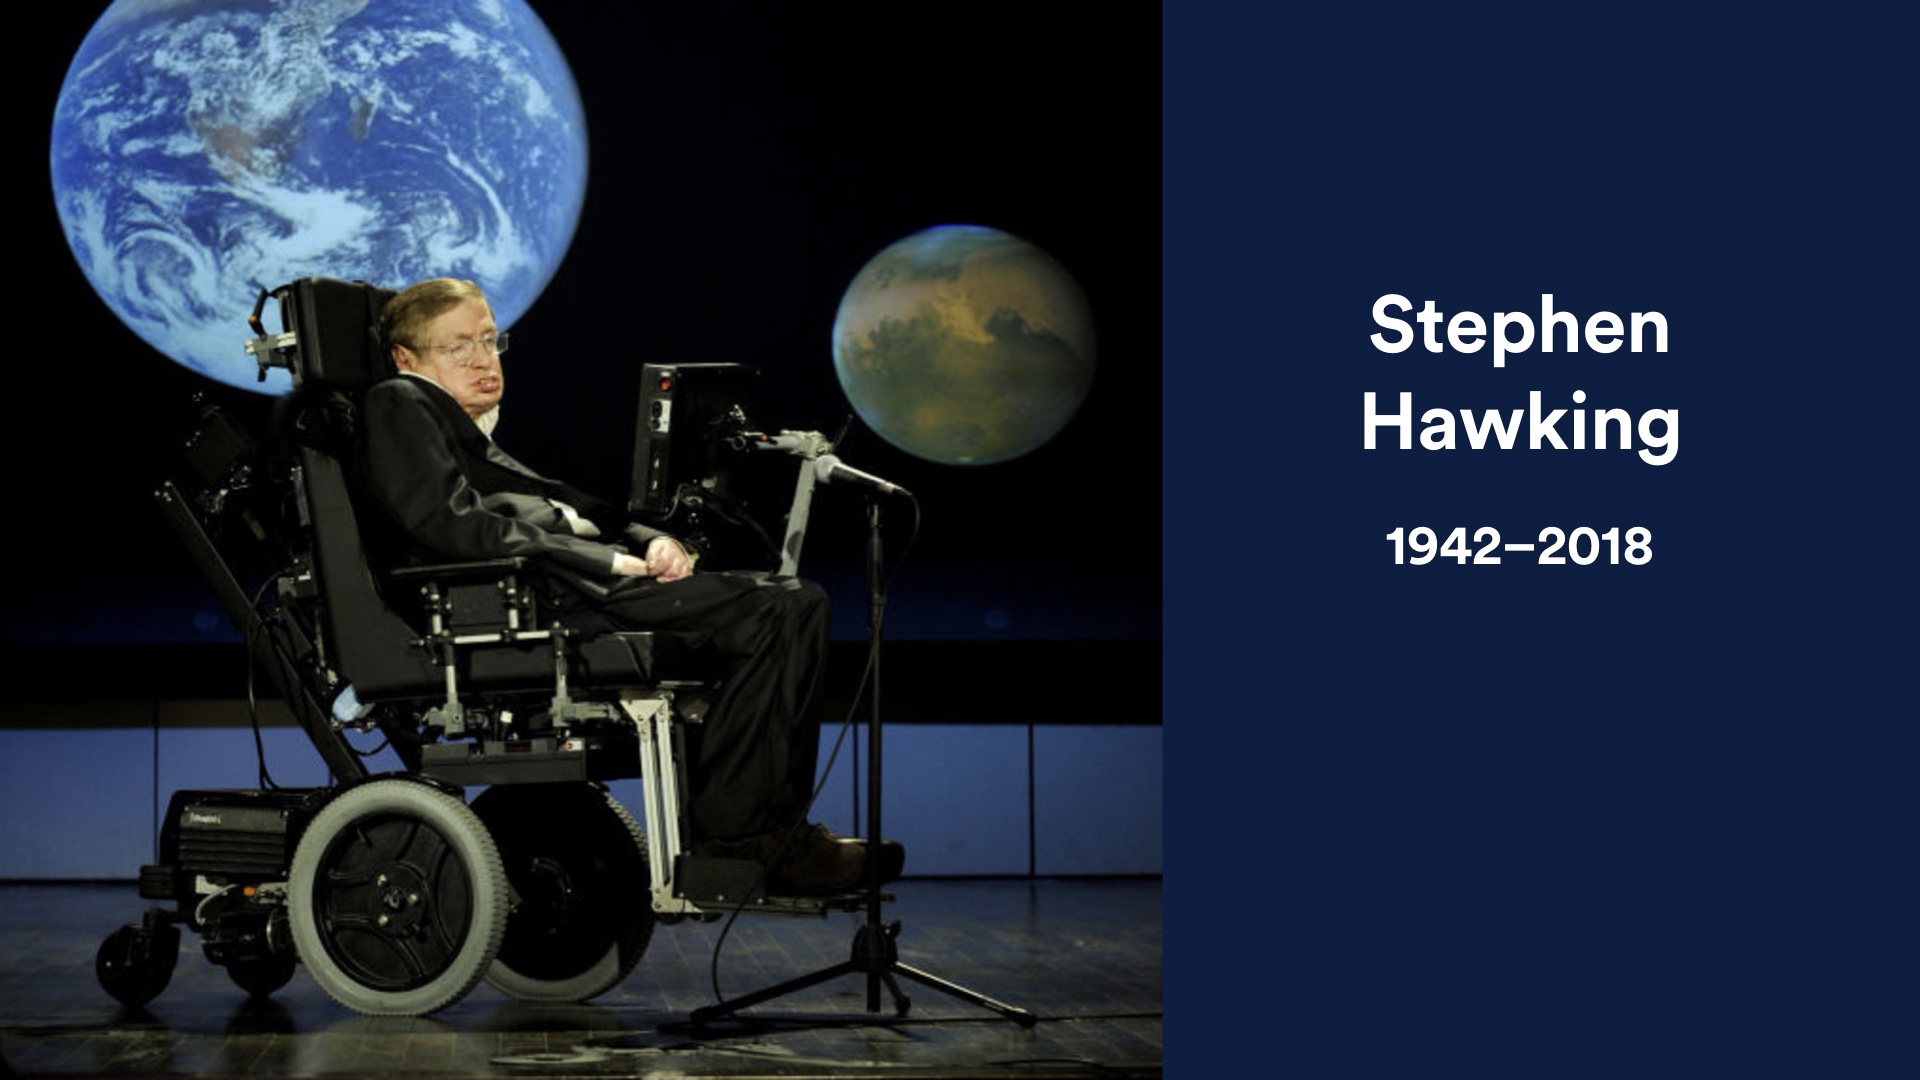 Slide image: photo of Stephen Hawking on stage with planets behind him on screen